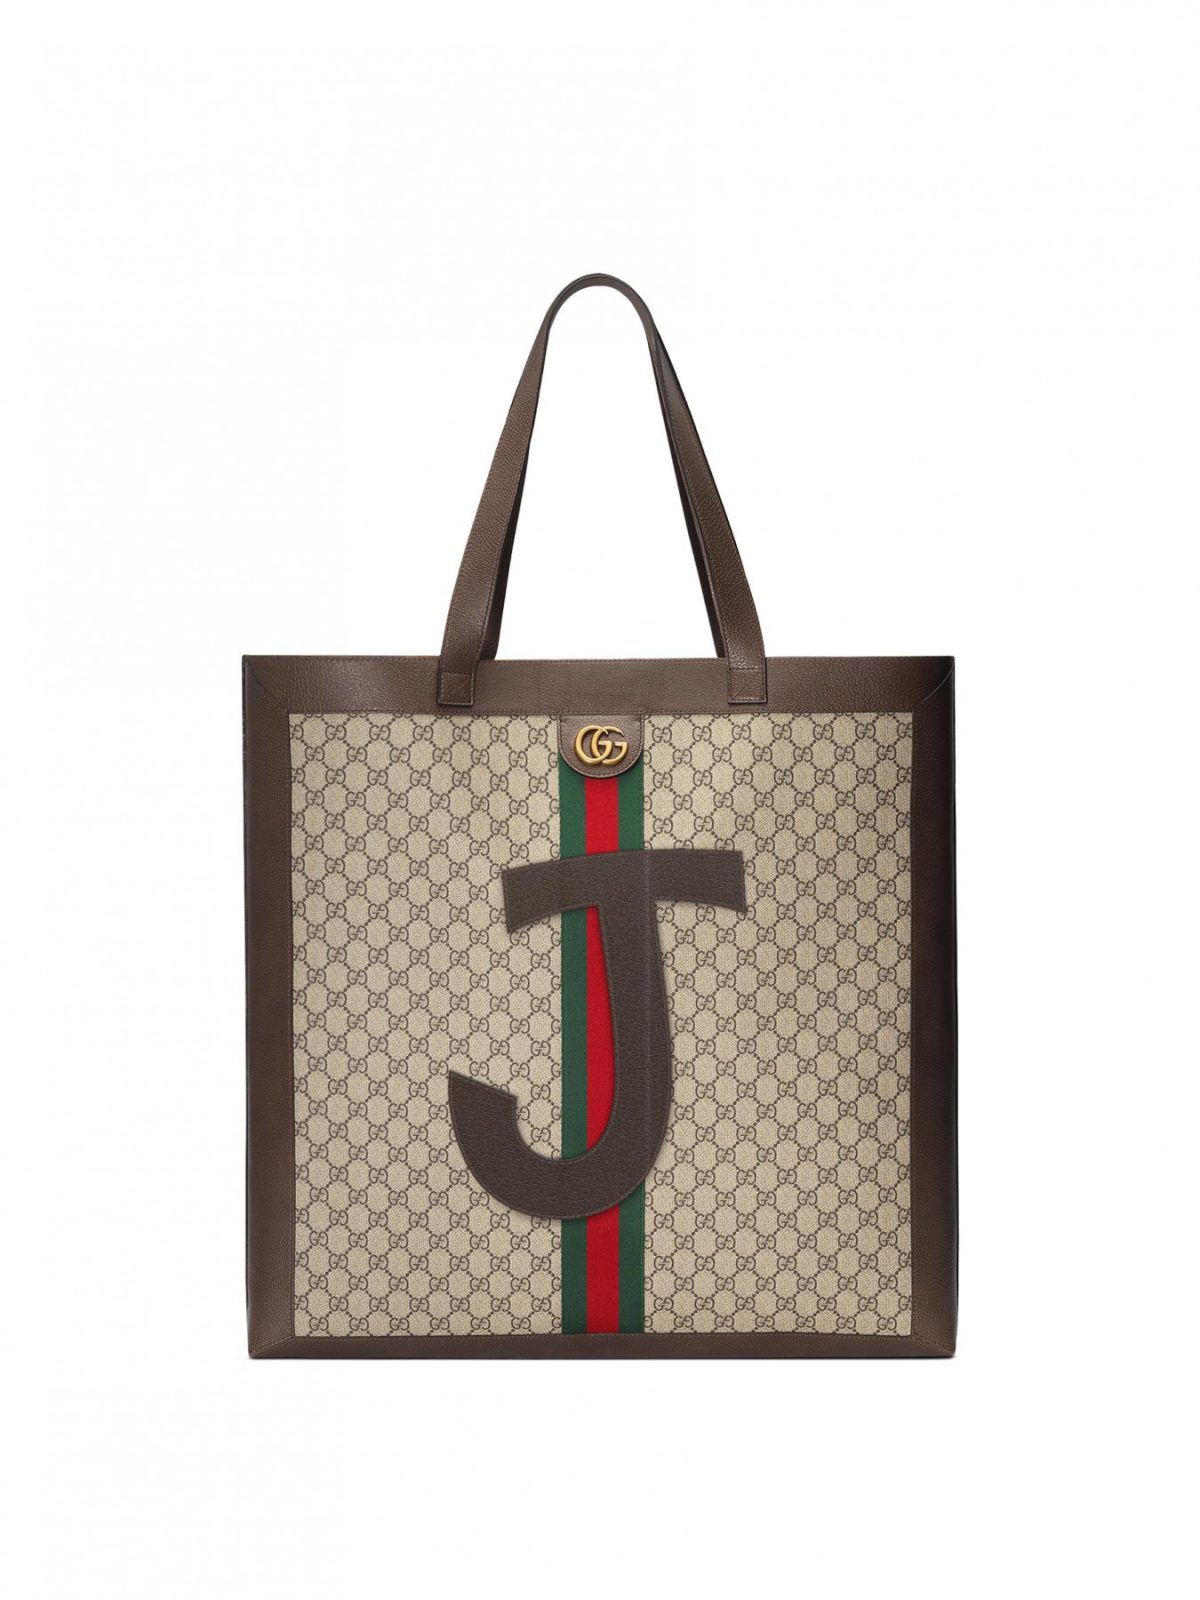 Ophidia tote from Gucci